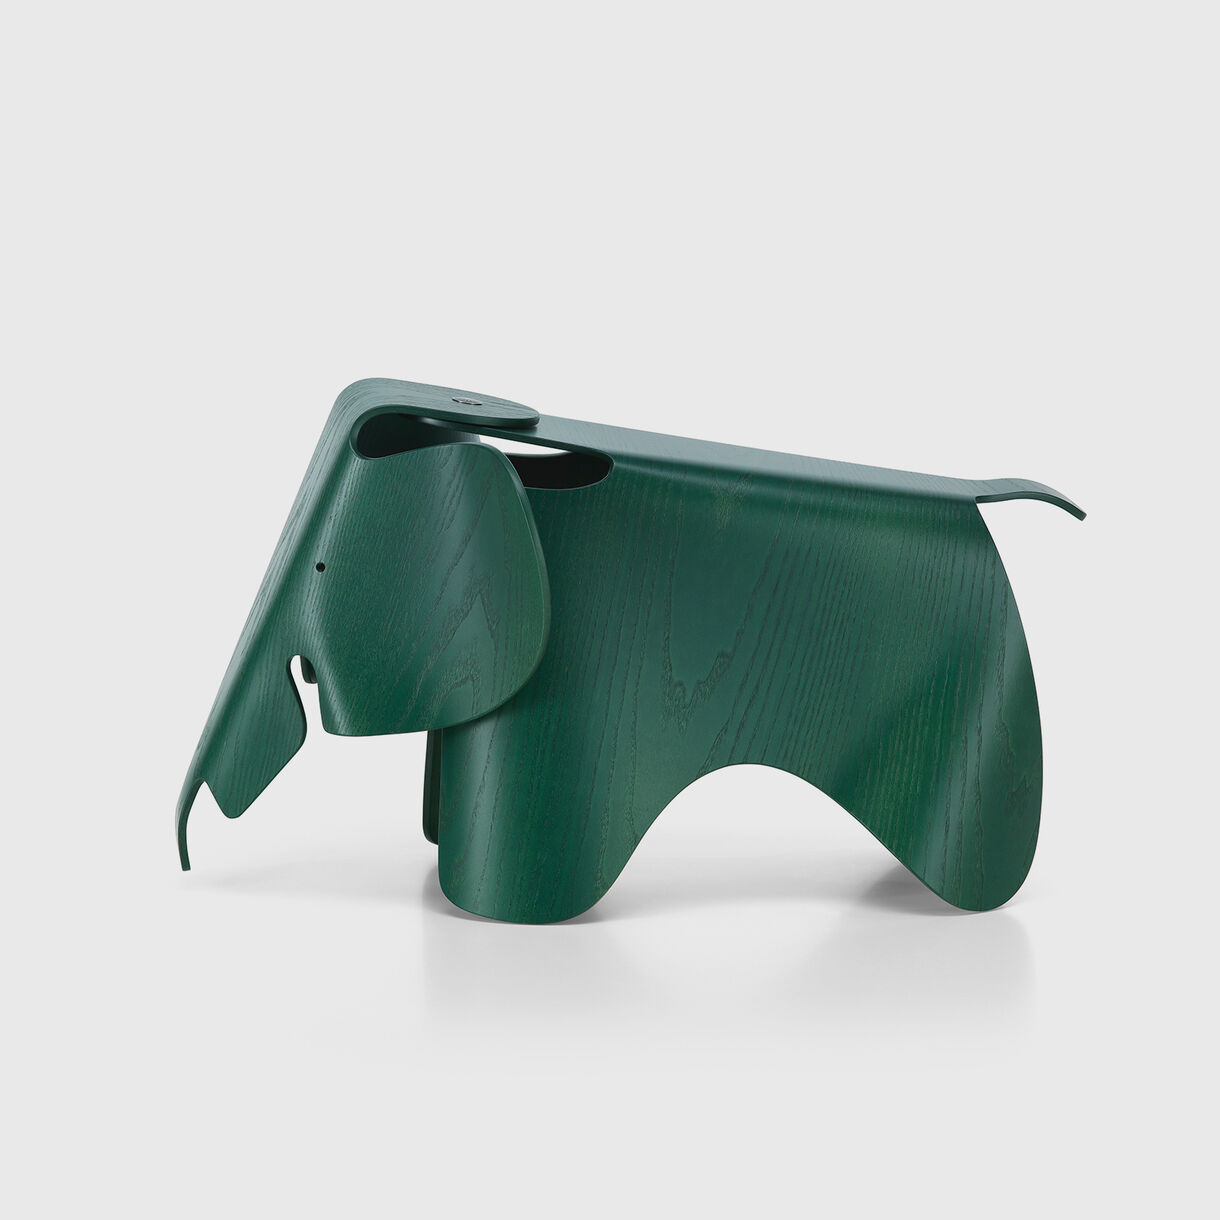 Eames Elephant (Plywood), Eames Special Collection